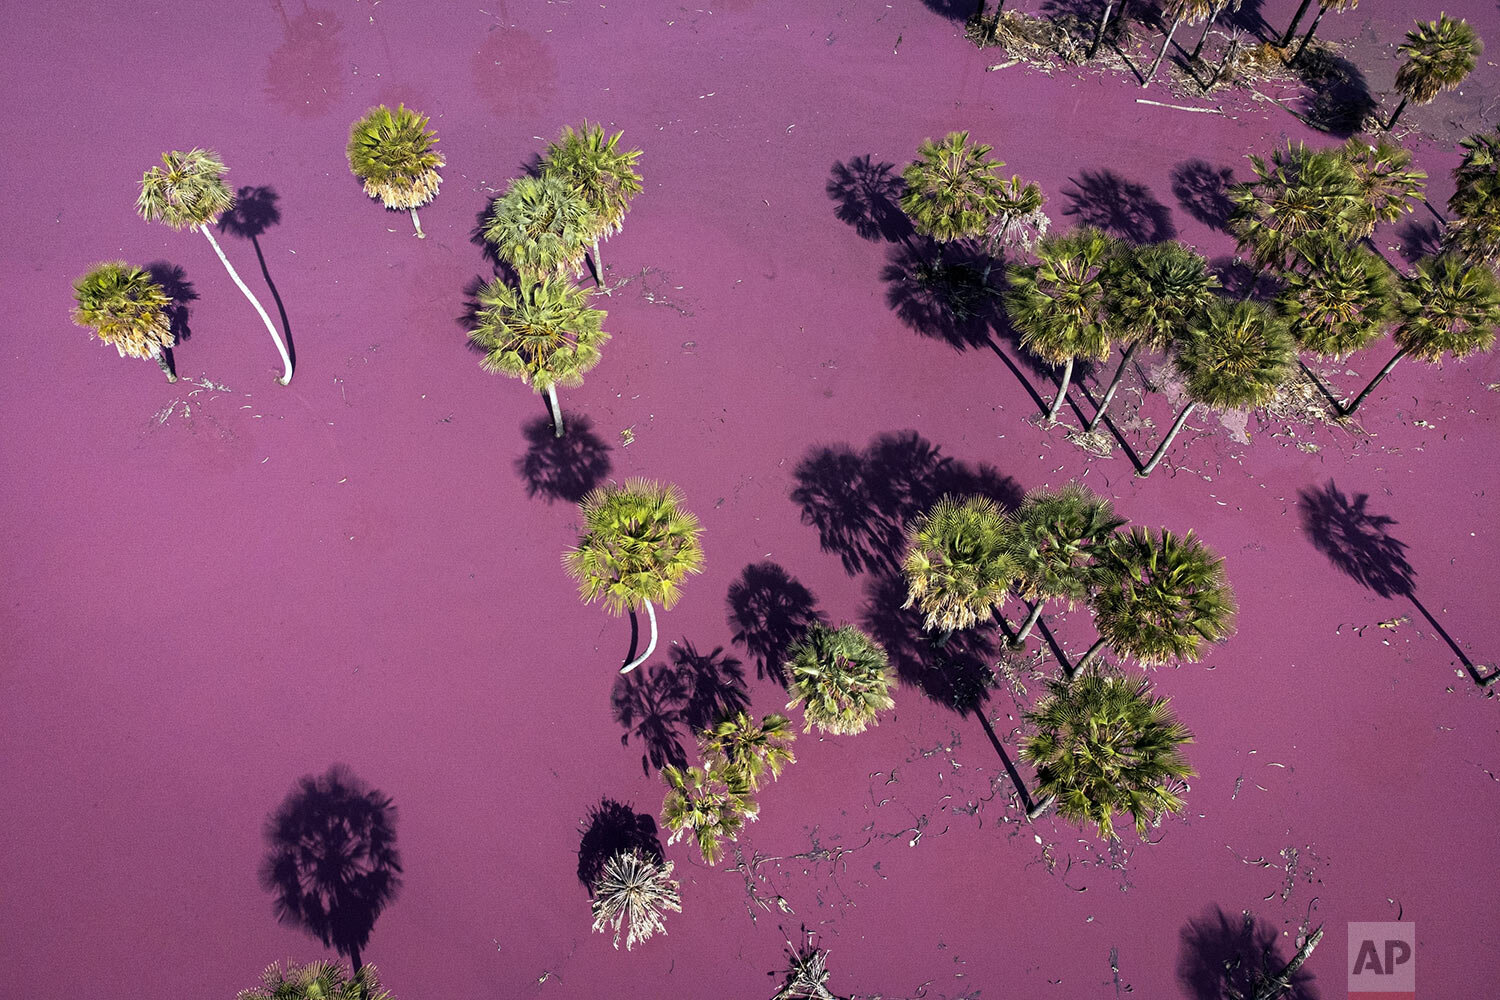  Pink liquid waste from the Durli Leathers S.A. tannery fills an open pit in Paraguari, Paraguay, Aug. 13, 2021, on the day the Environment Ministry stopped the tannery's operations. Nearby landowners fear that once it rains the liquid will contamina